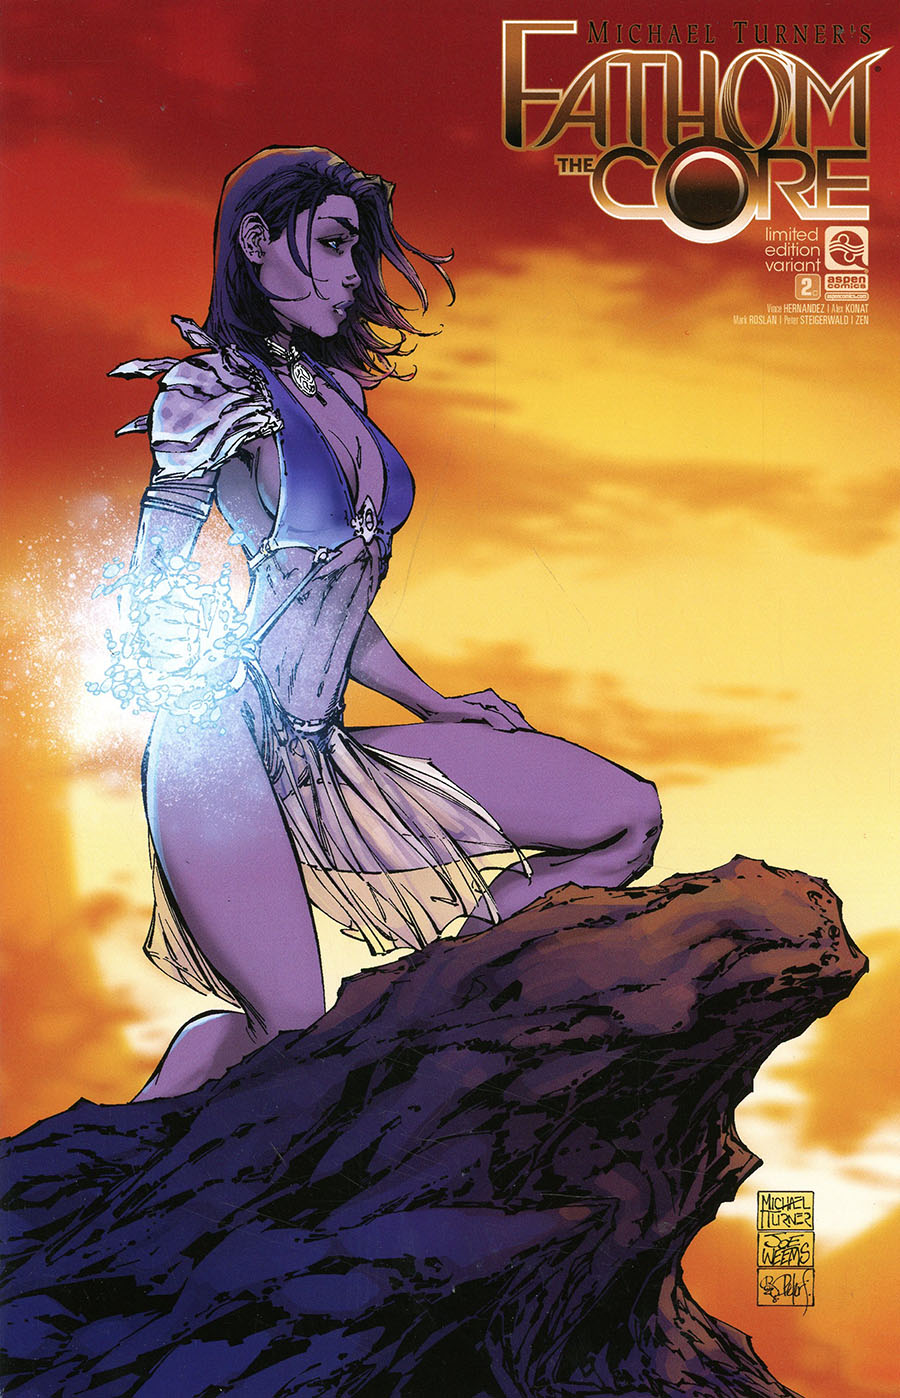 Fathom The Core #2 Cover C Limited Edition Michael Turner Variant Cover